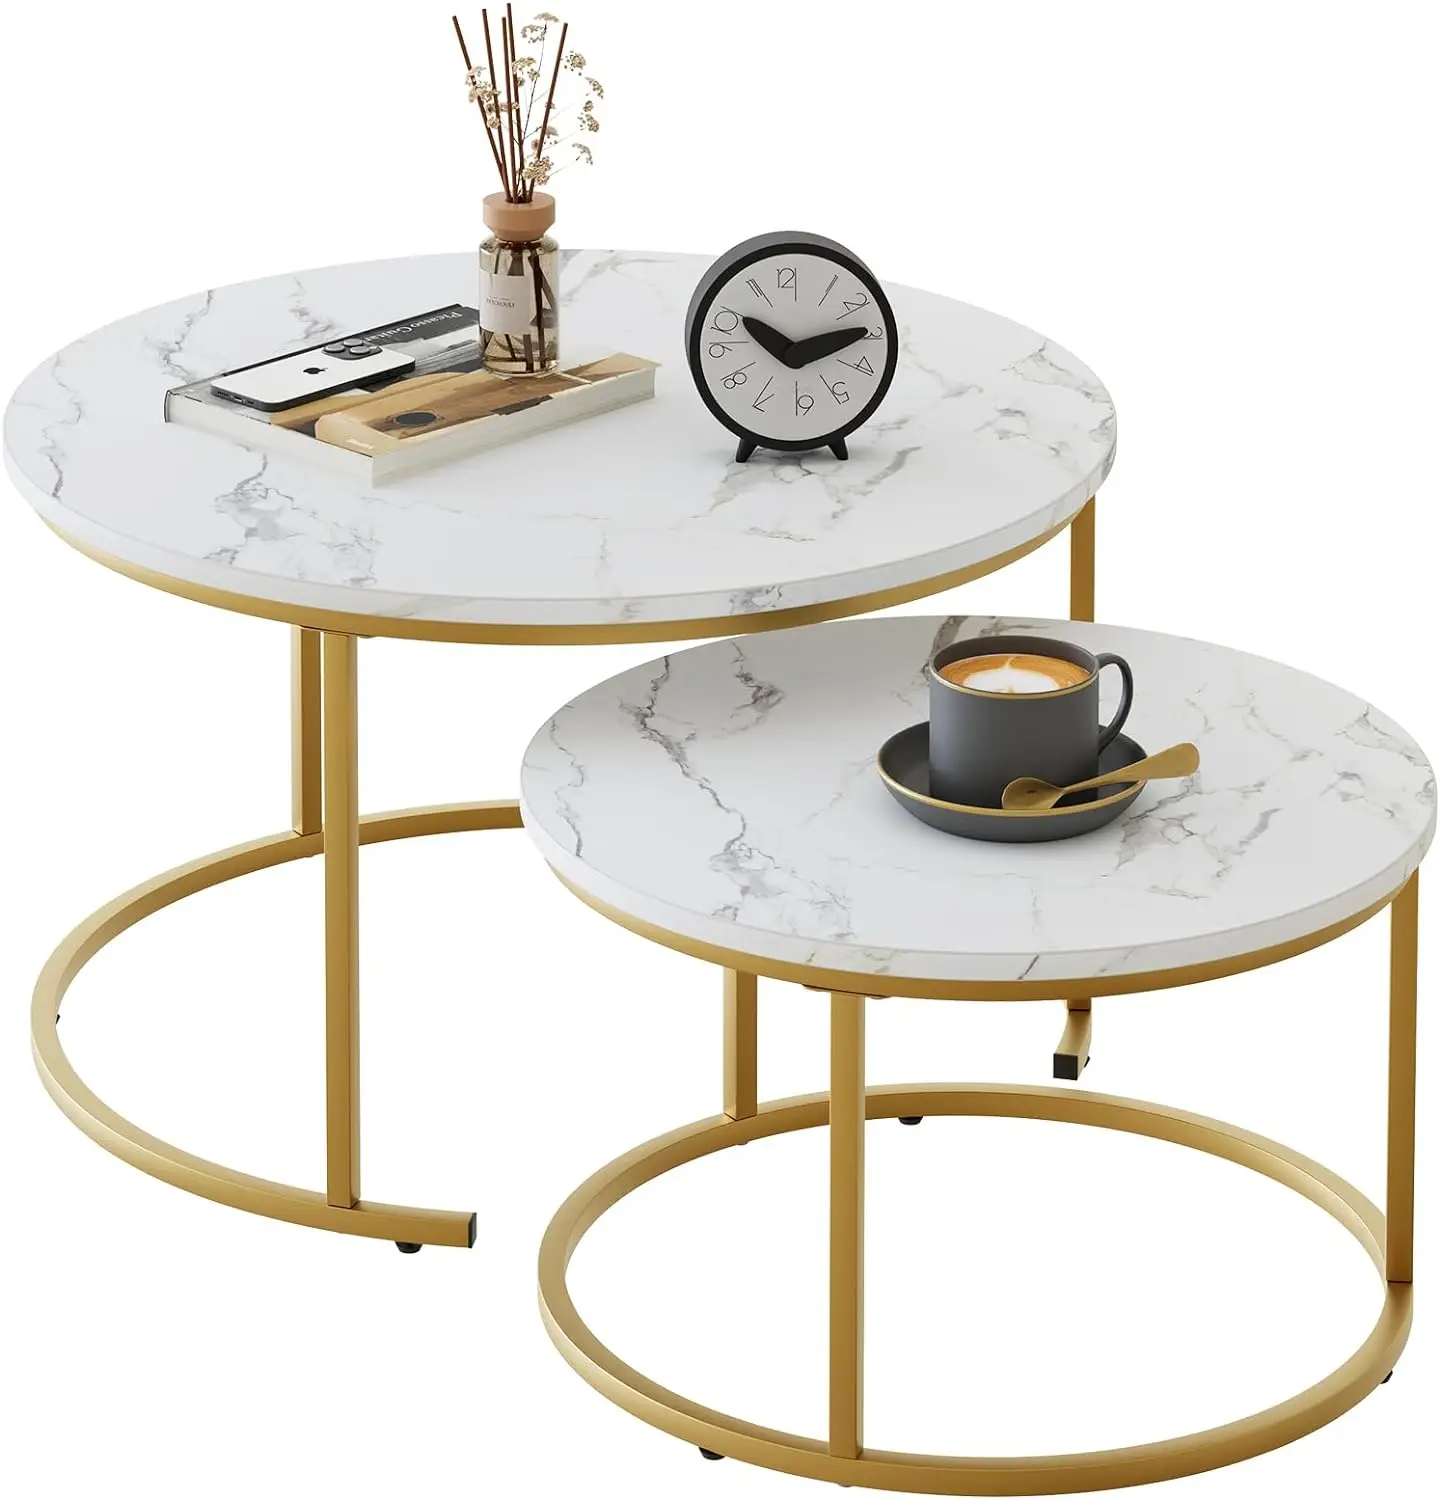 

Nesting Coffee Table 31.5IN Set of 2, White Faux Marble Gold Steel Frame Circular and Round Large Wooden Tables 31in, Living